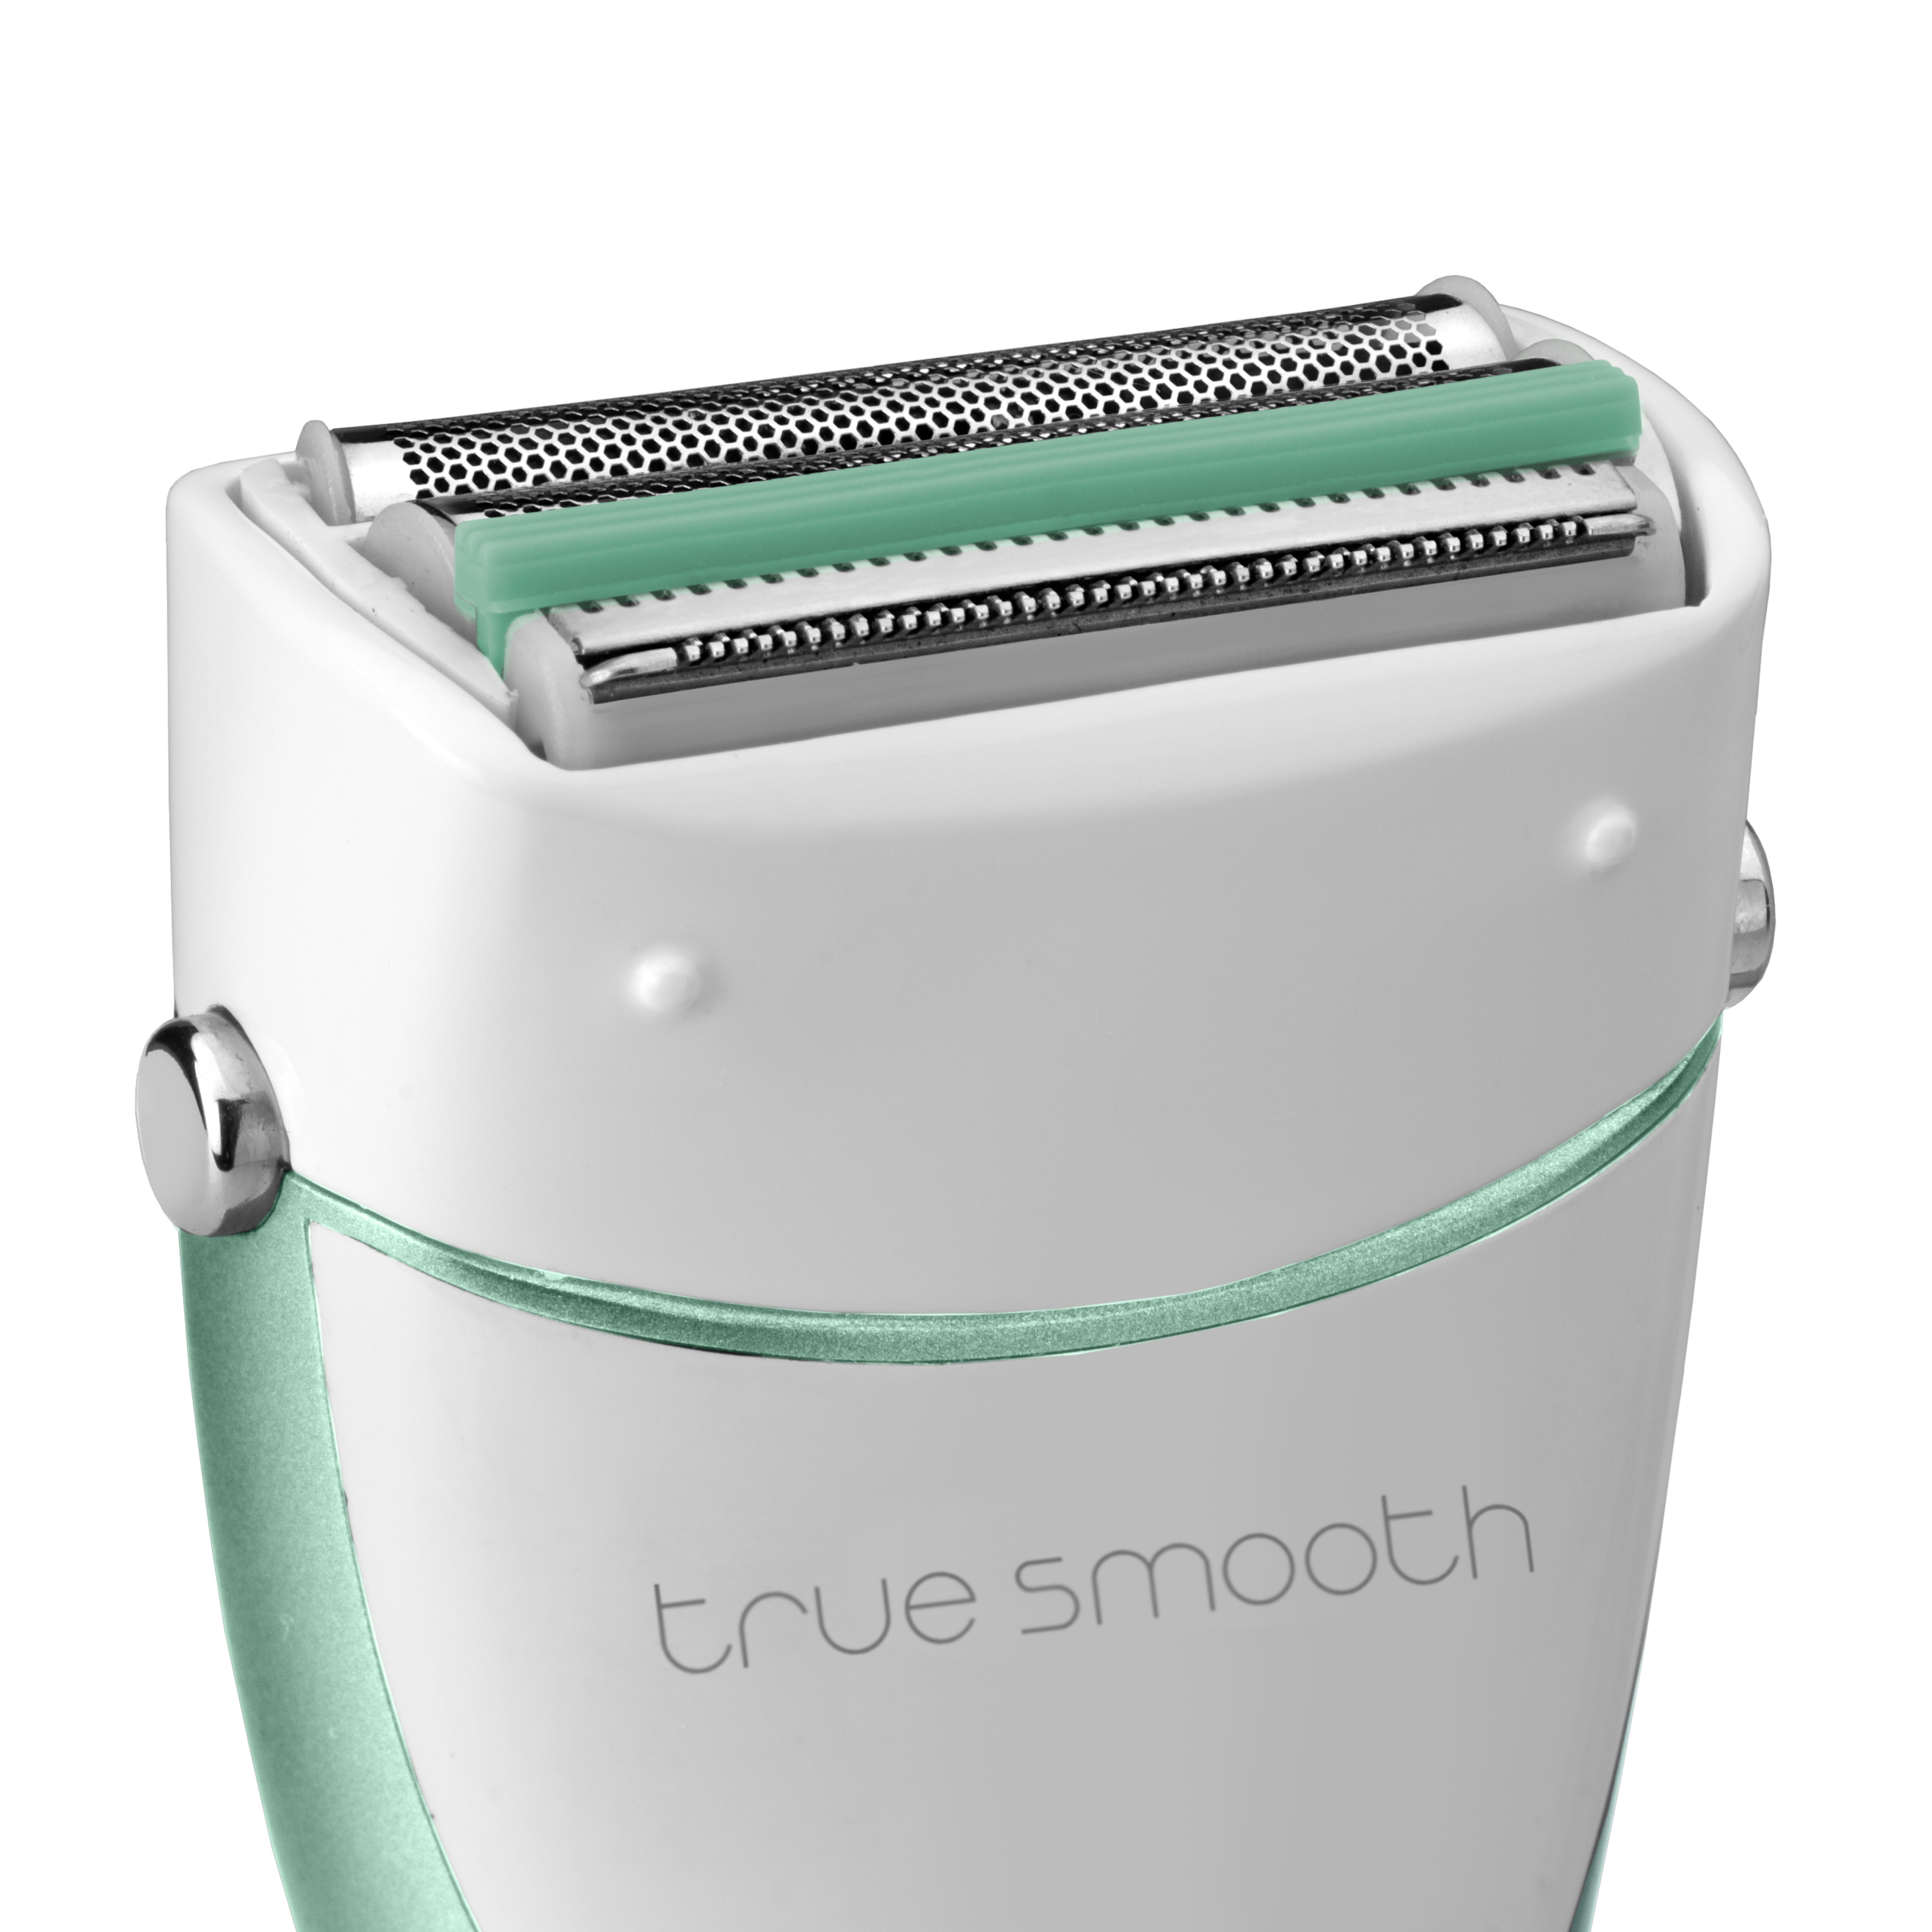 Picture of Truesmooth Rechargeable Lady Shave